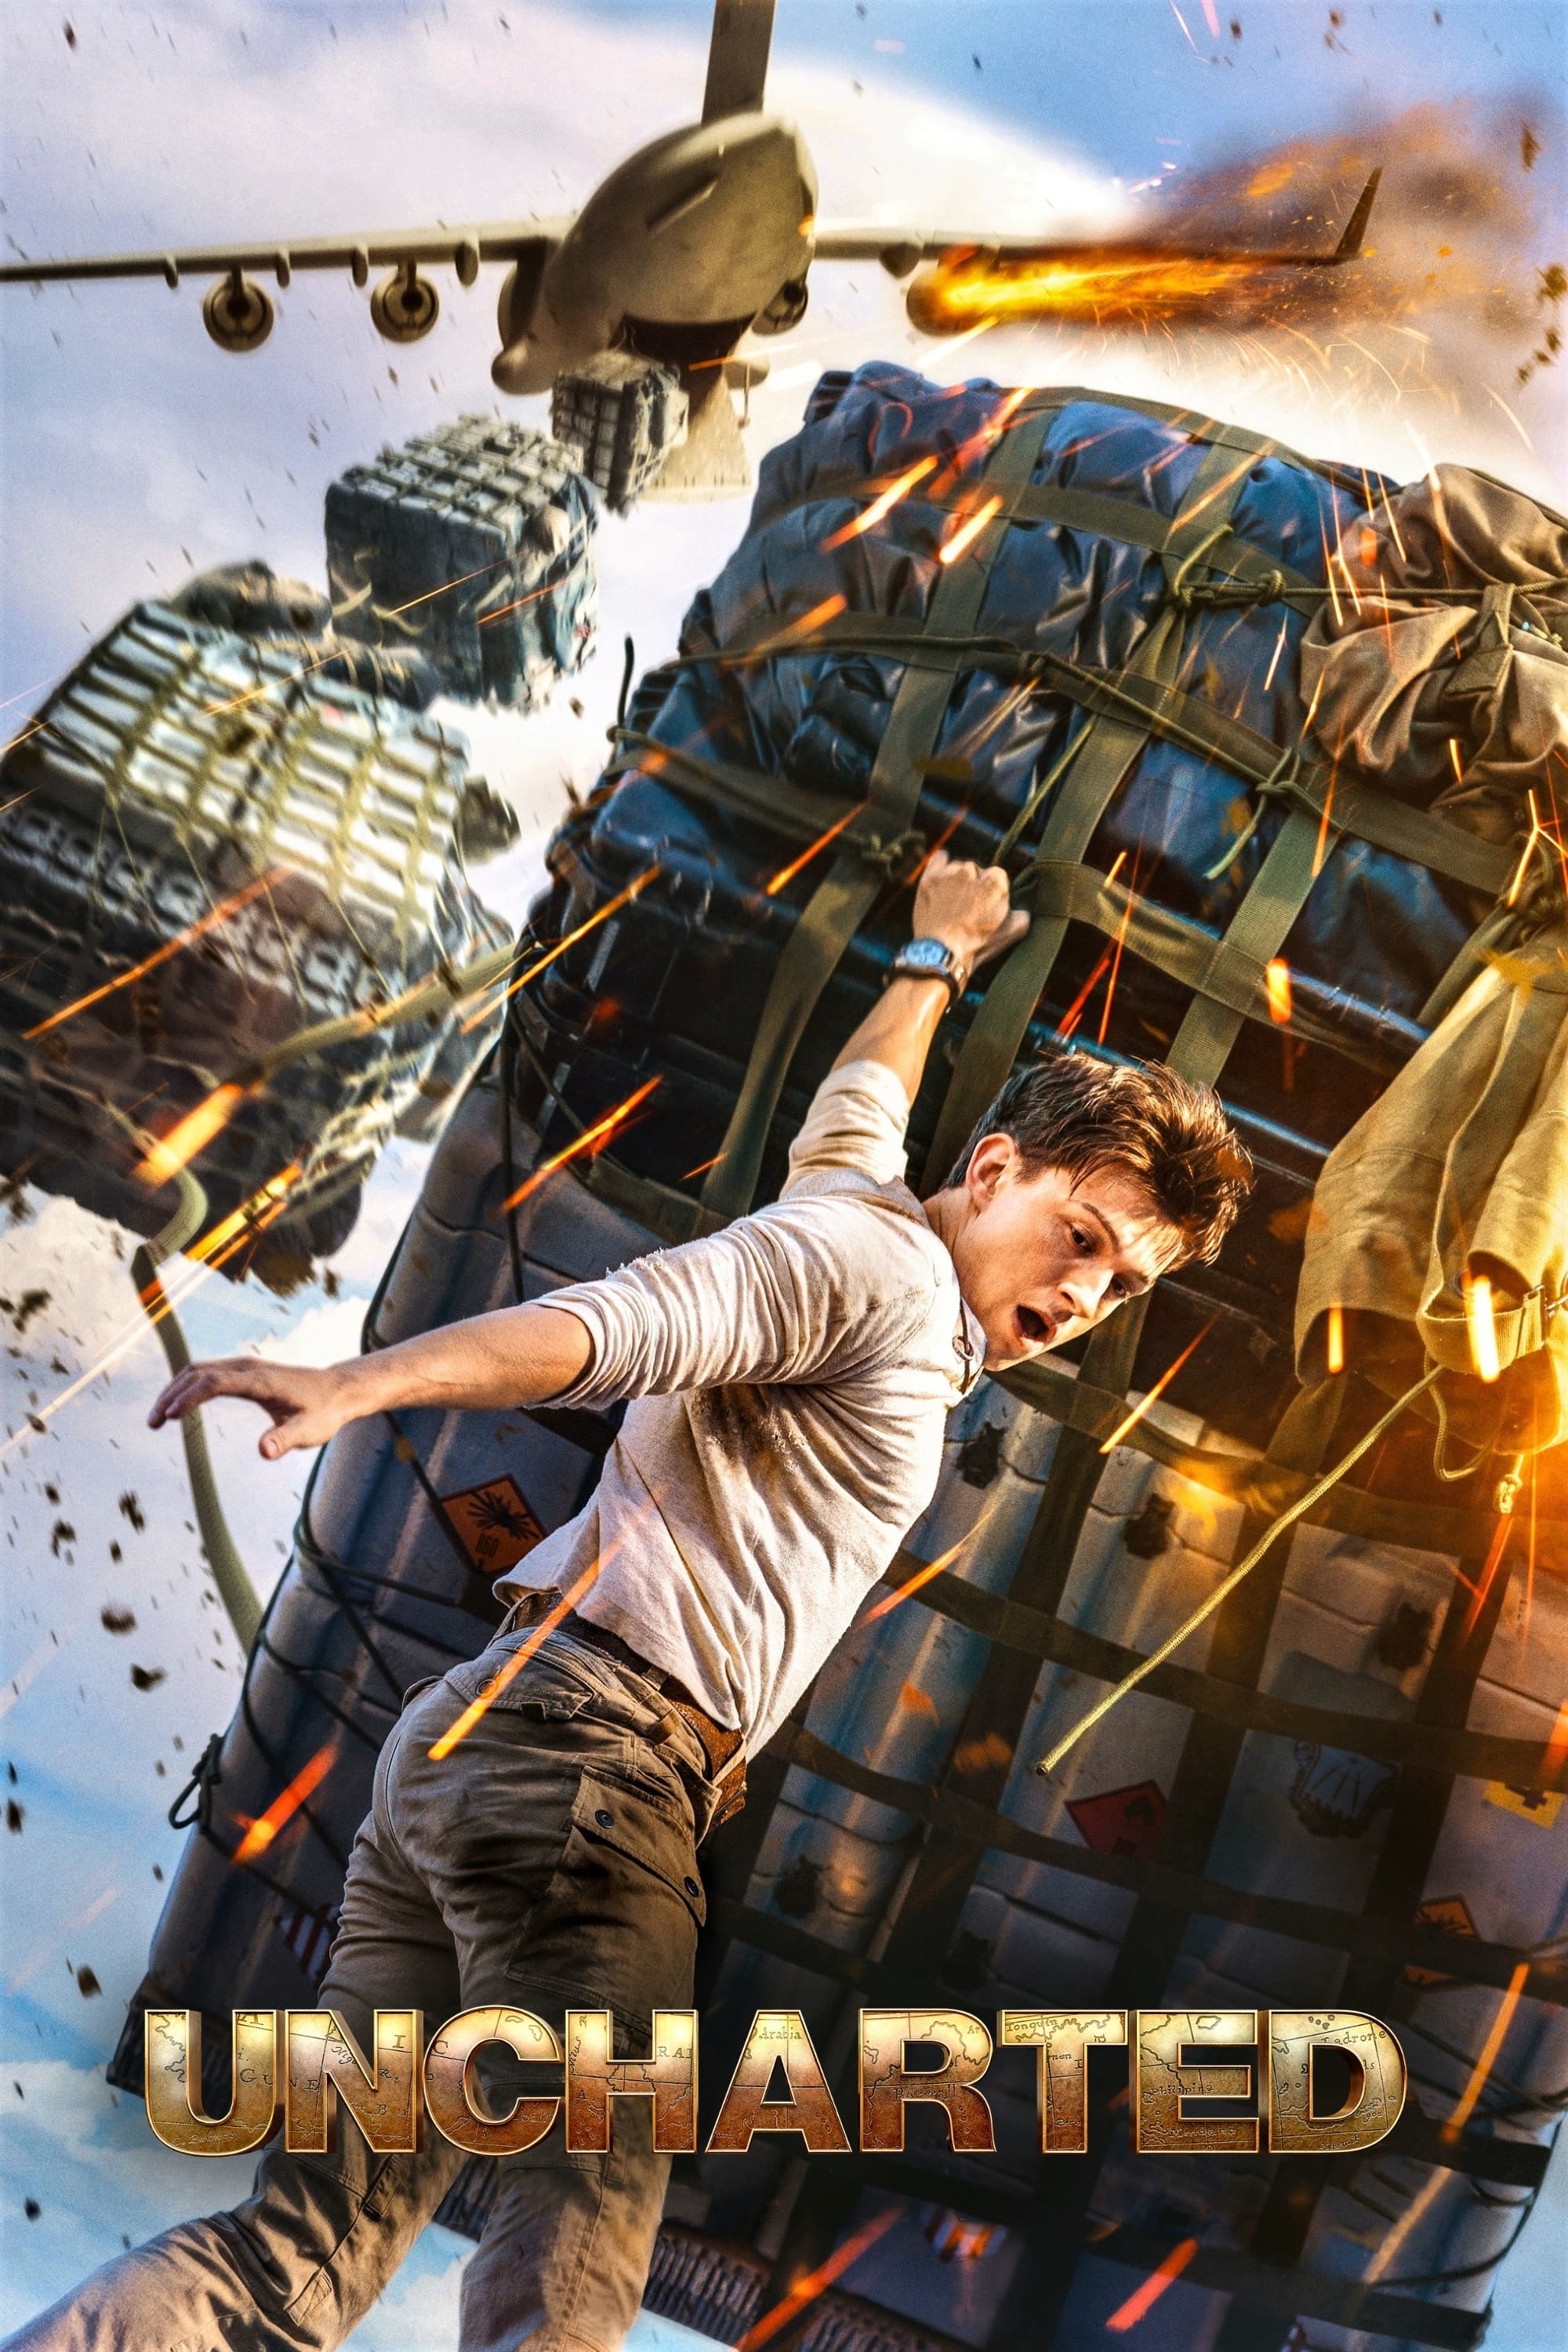 Uncharted (2022) REMUX 4K HDR Latino – CMHDD